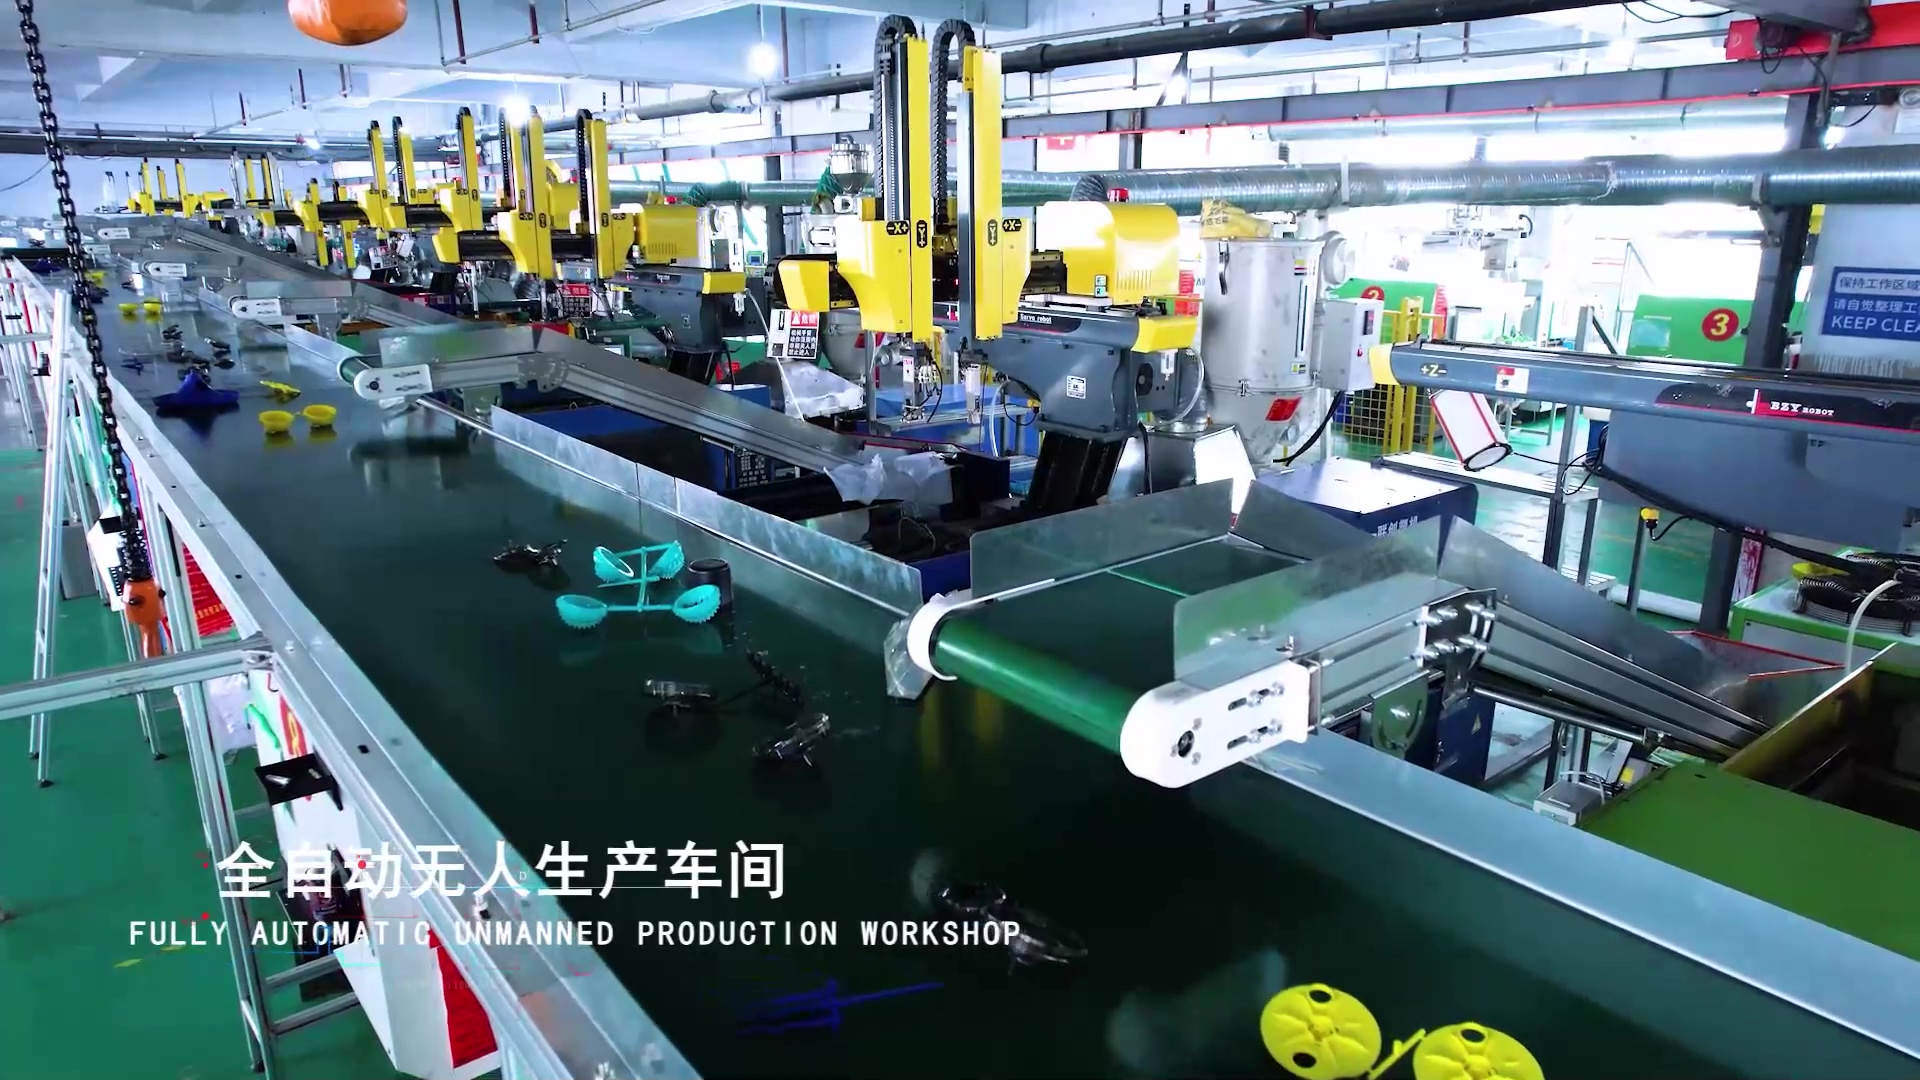 Fully Automatic Unmanned Production Workshop